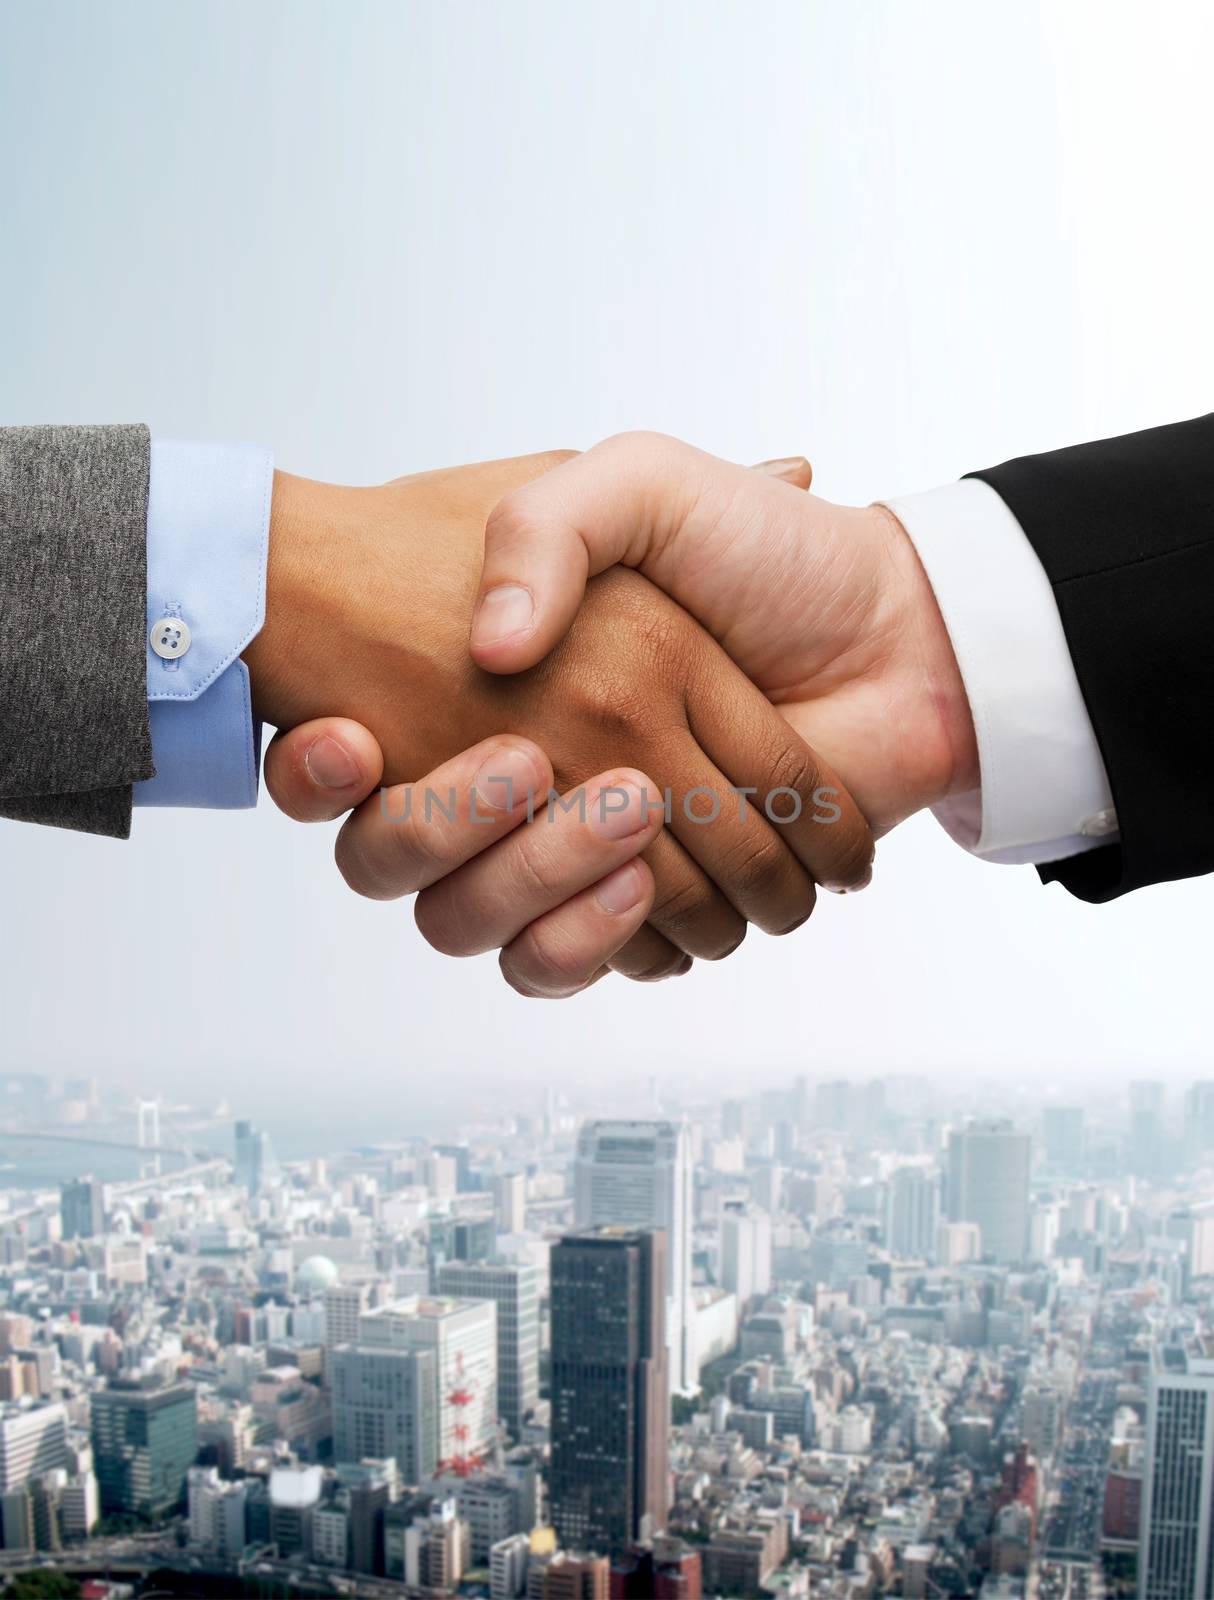 business and office concept - businessman and businesswoman shaking hands